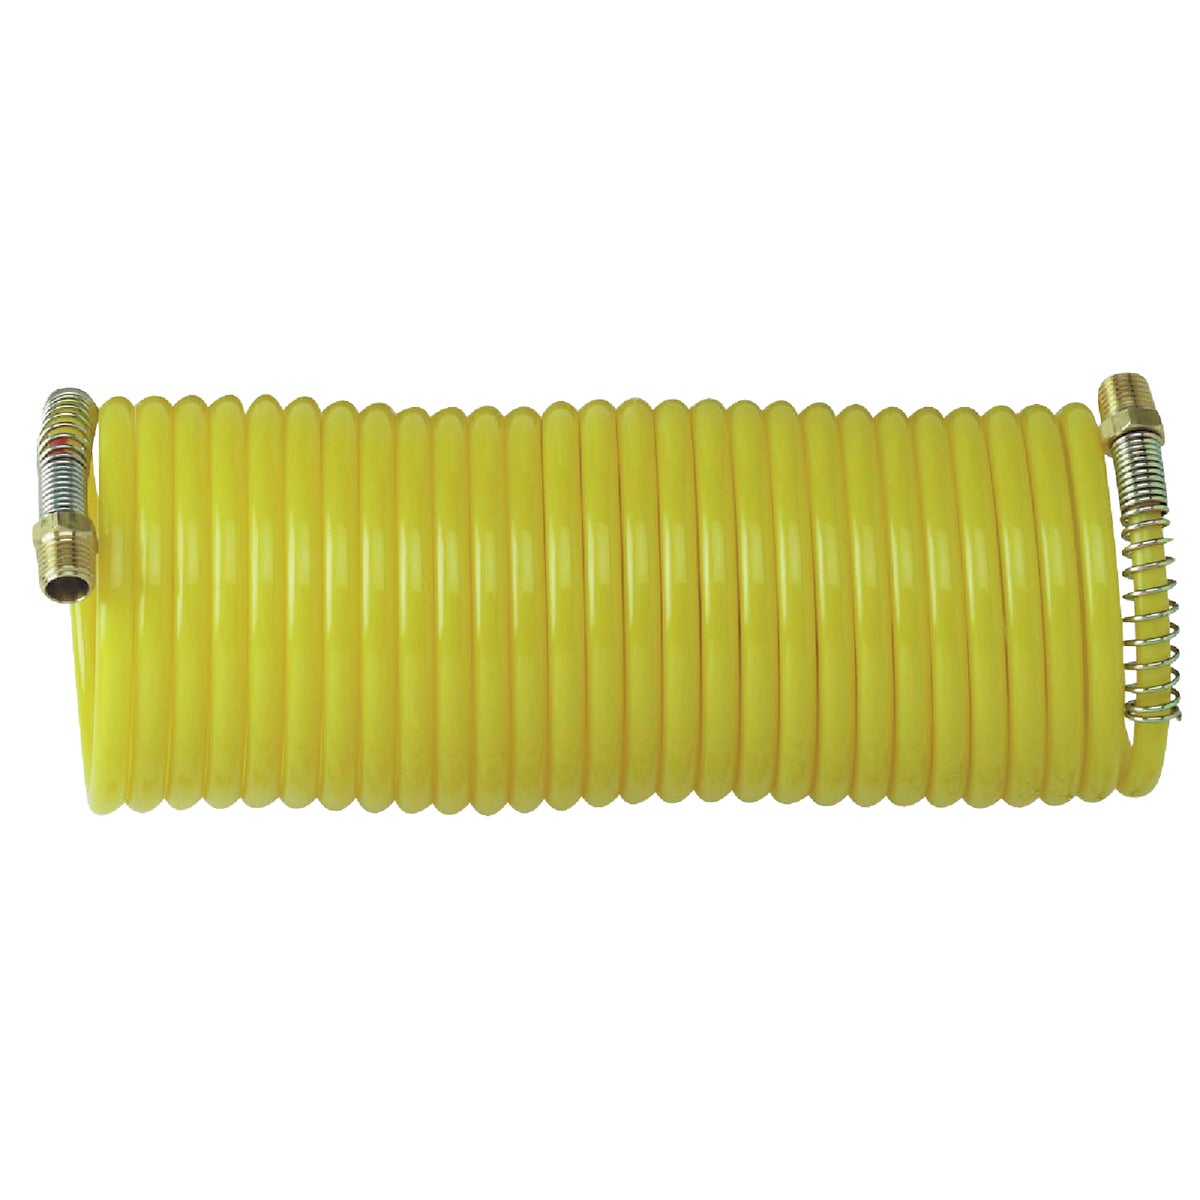 Item 579556, Yellow nylon. Permanently coiled. Working pressure: 150 P.S.I.